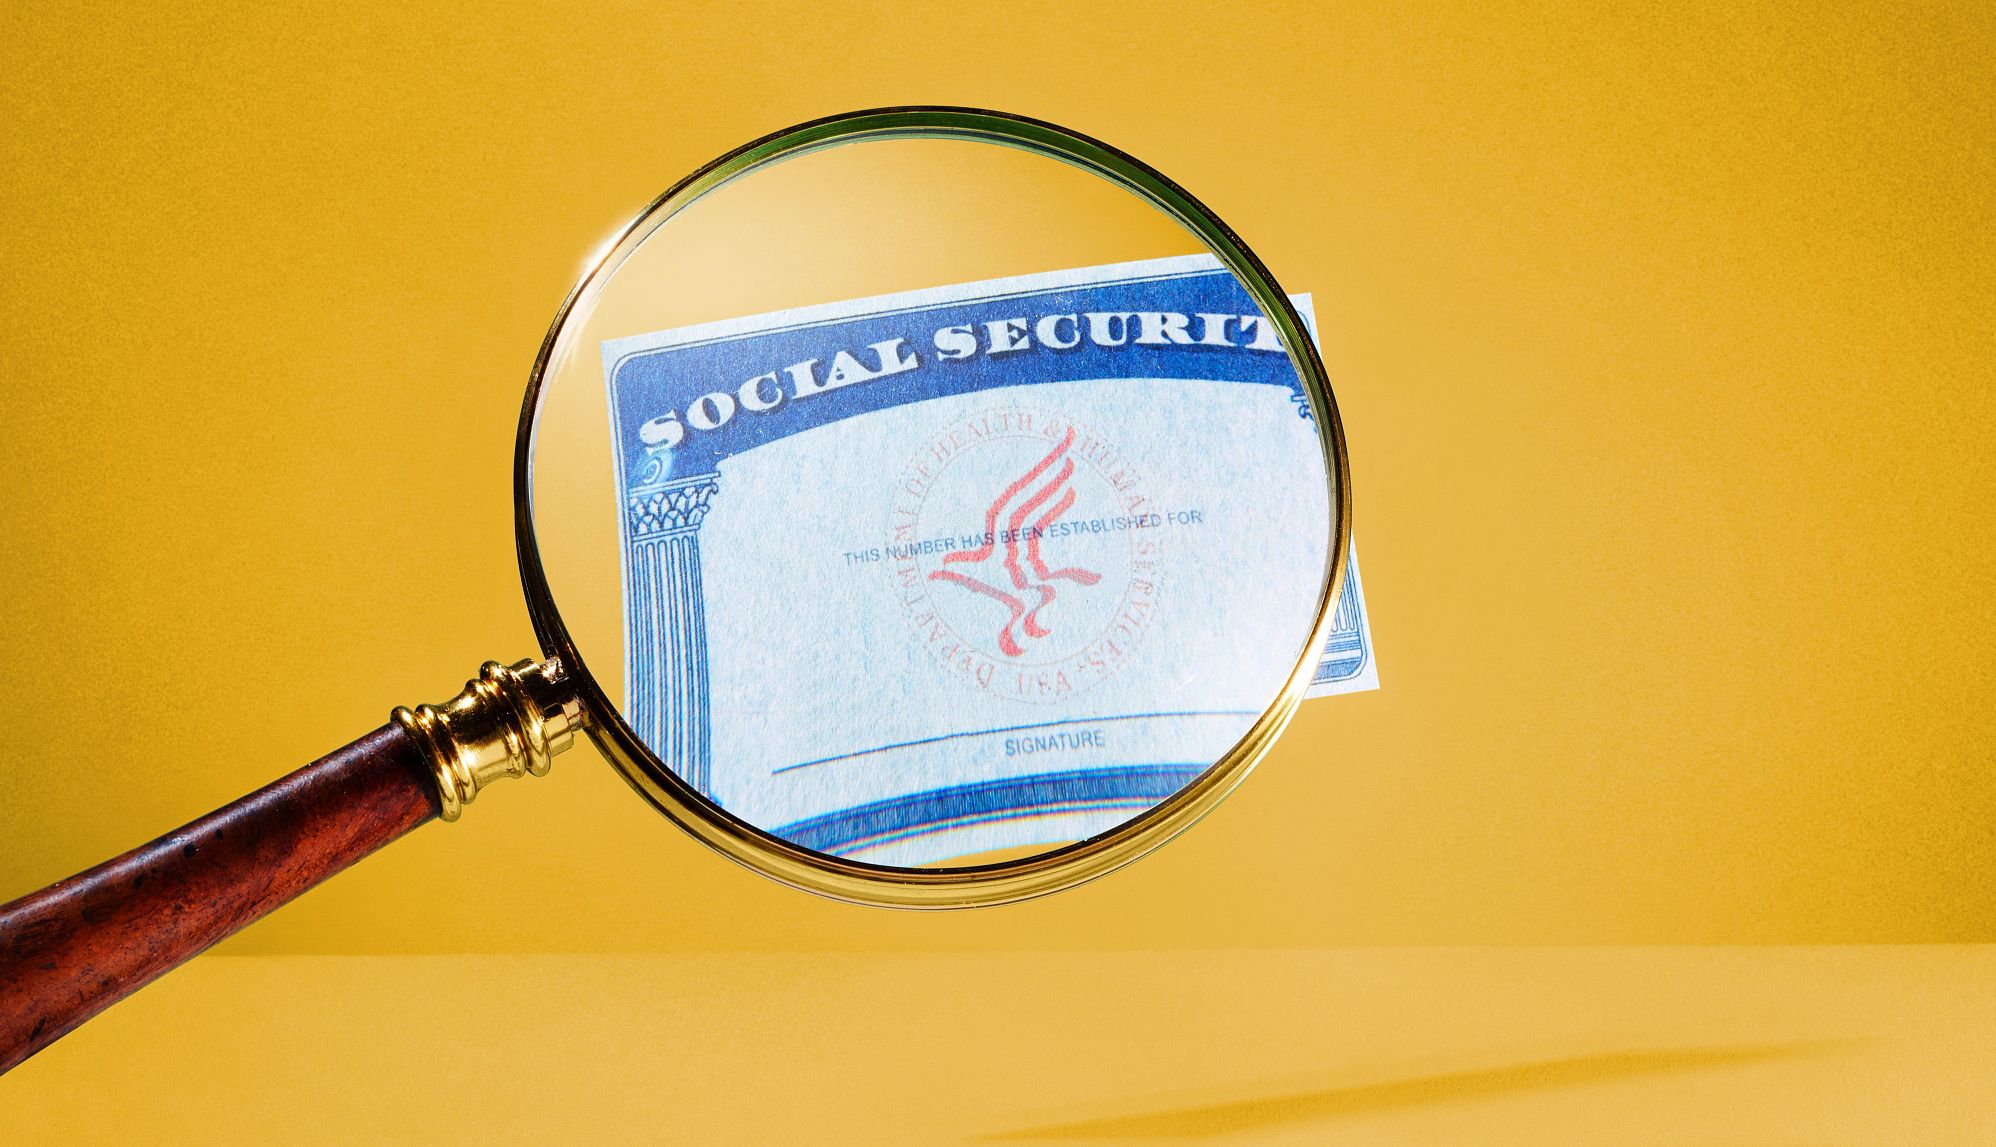 social security card under a magnifying glass on a gold background